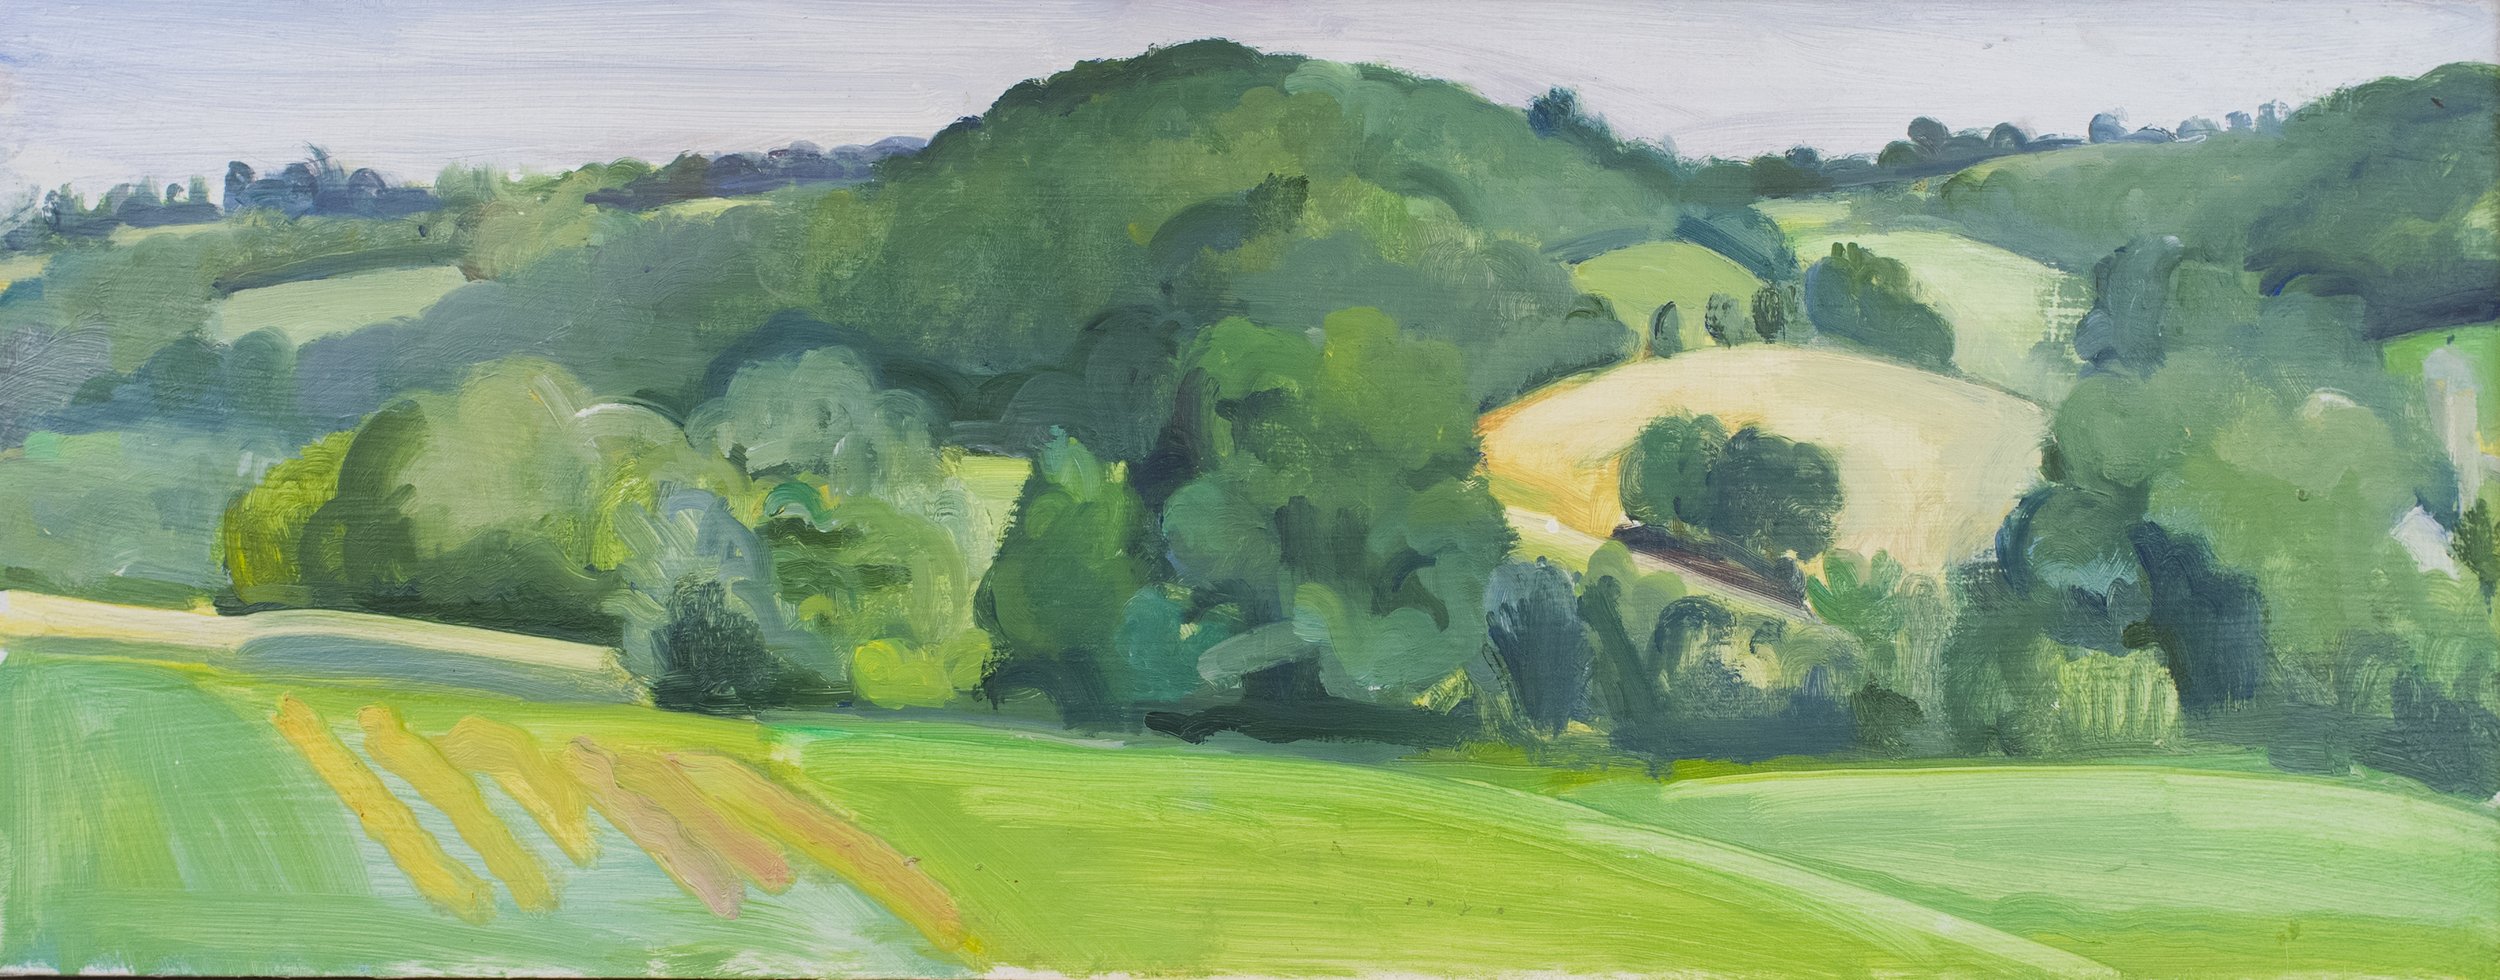   Otts Fields , c. 2000, oil/panel, 10 x 20 in. (Private collection) 